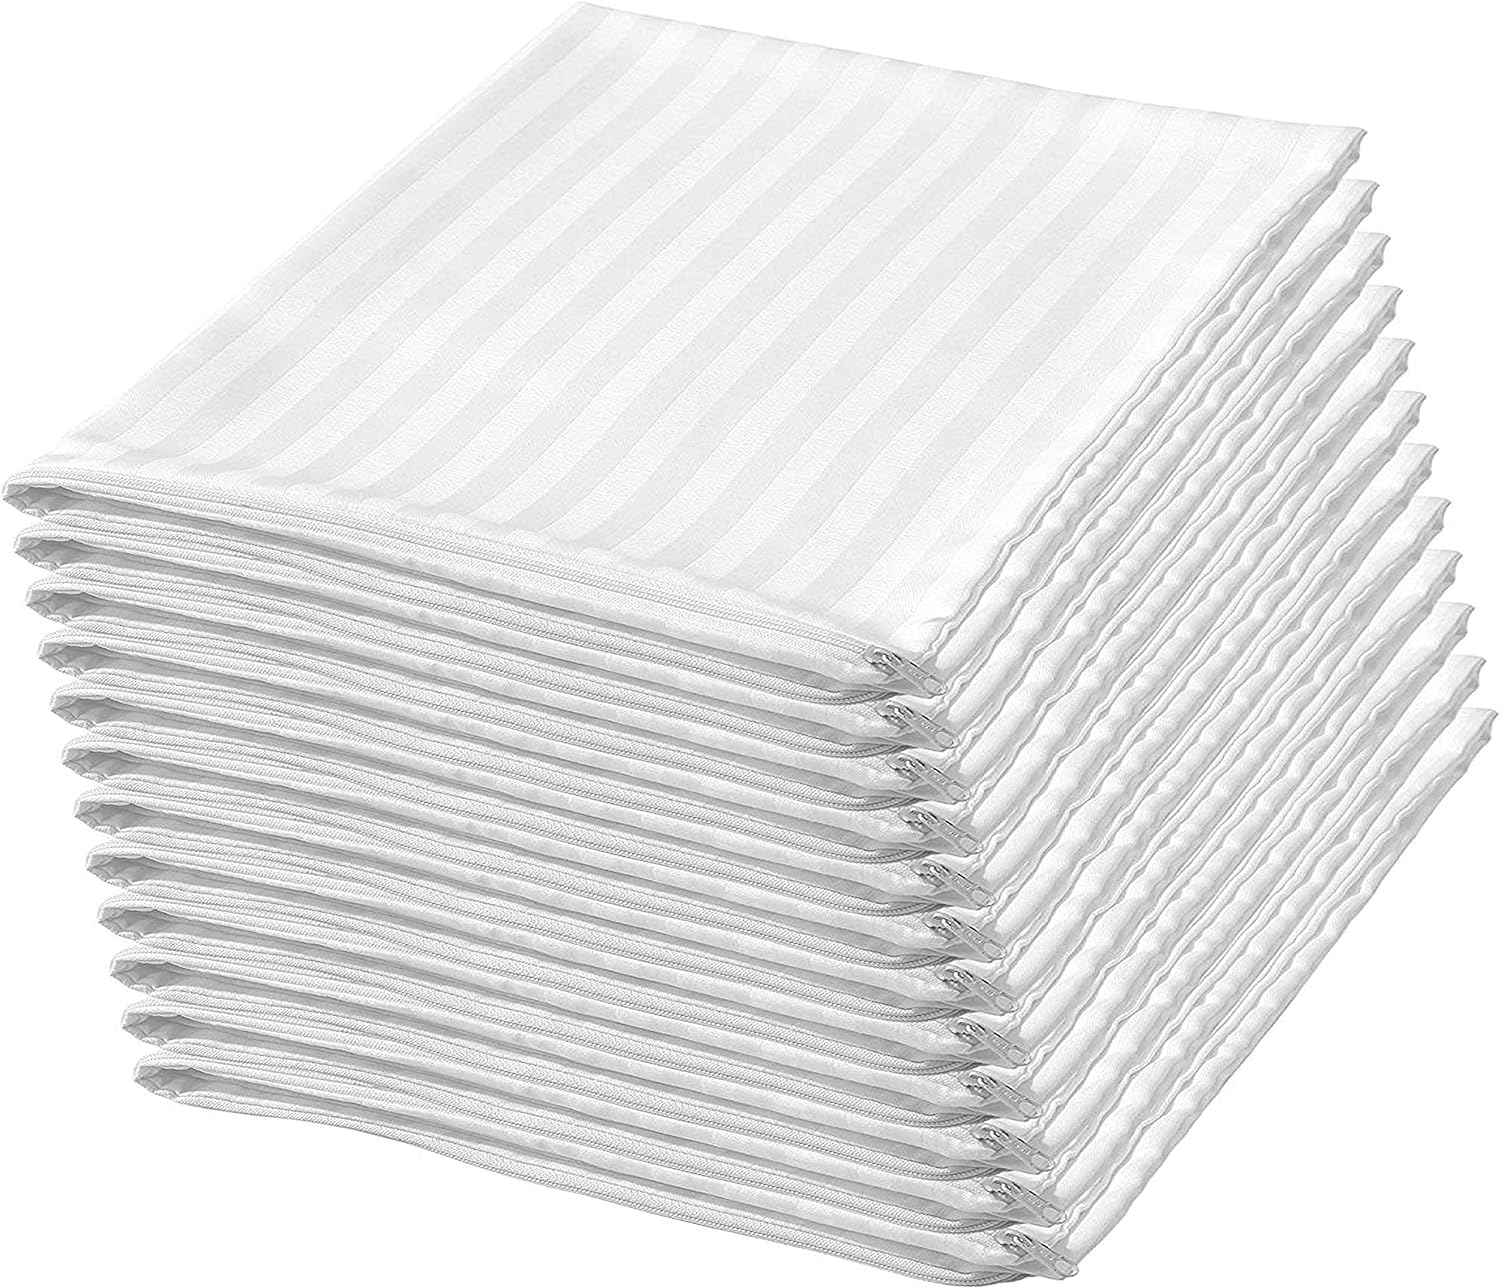 Niagara Sleep Solution 12Pack Pillow Protectors Standard 20x26 Inches Cotton Sateen Blend Dozen High Thread Count Standard Zippered White Hotel Quality Covers Cases